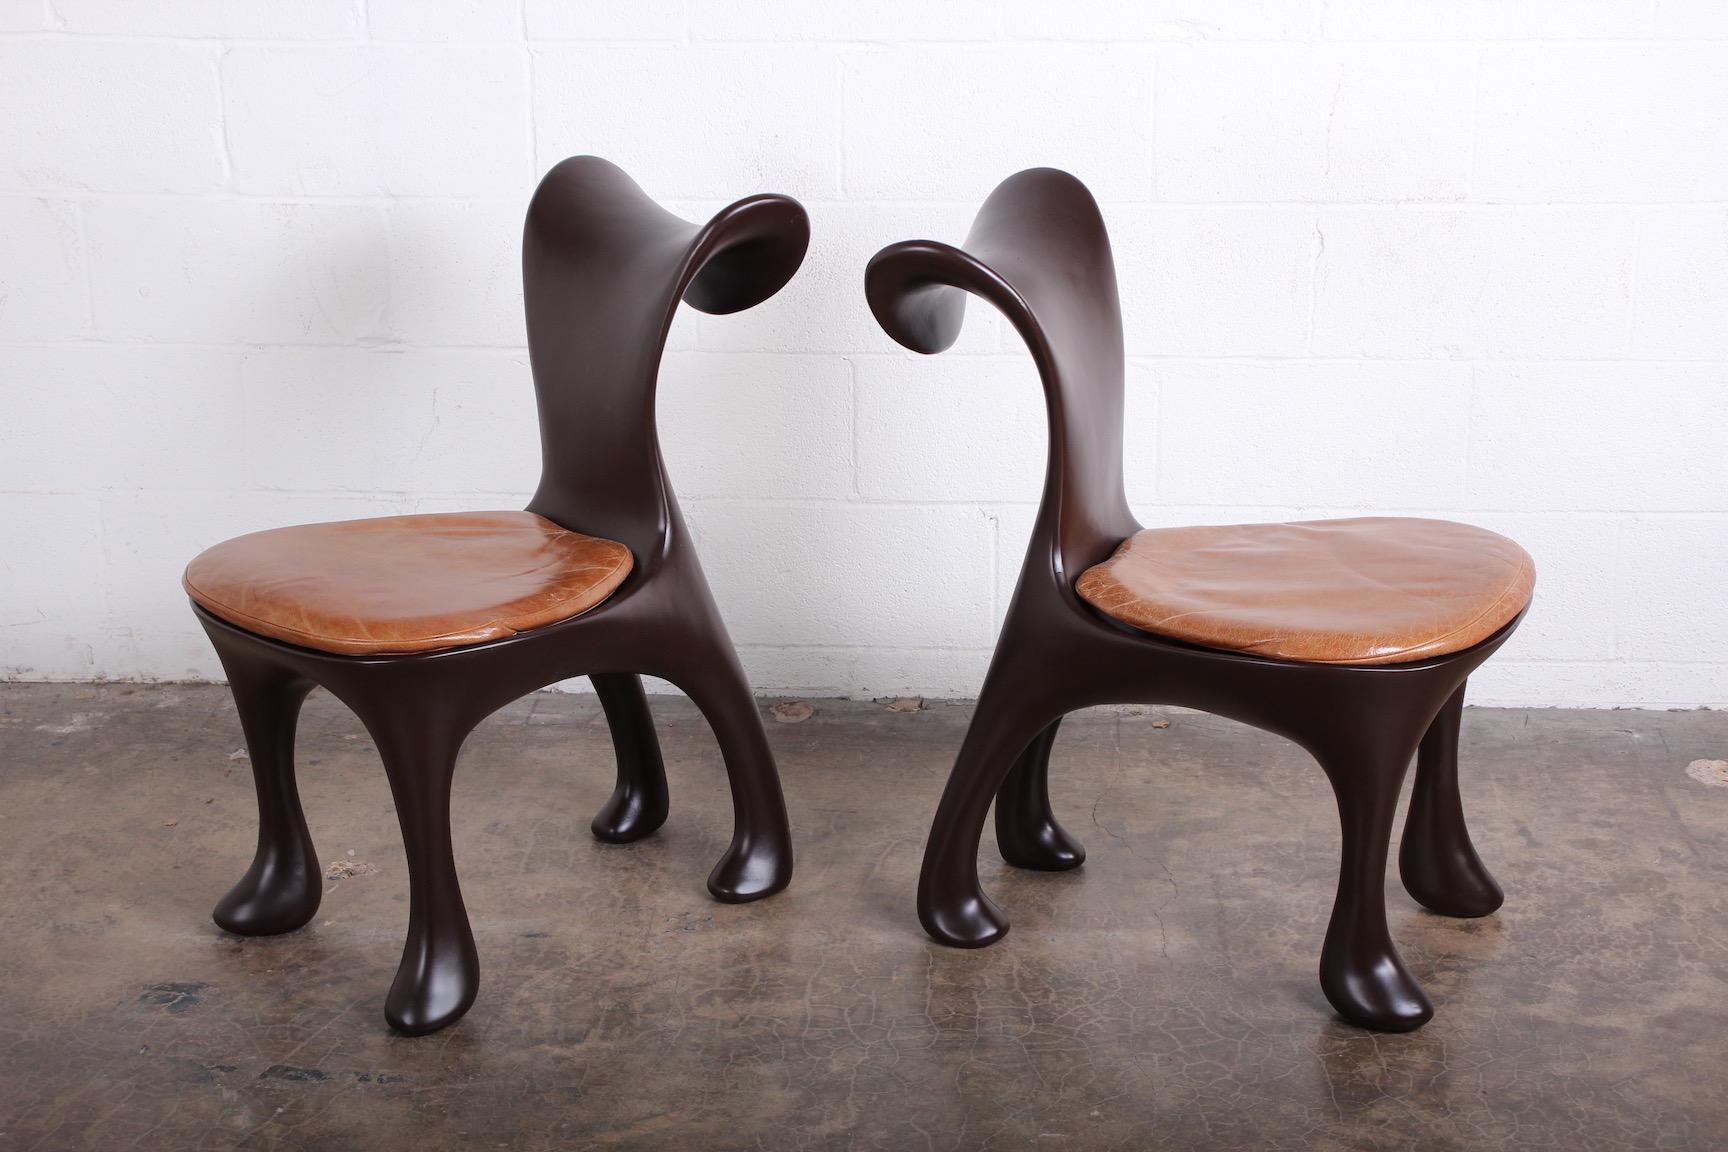 A set of ten 'Hoodie' dining chairs designed by Jordan Mozer for the Américas Restaurant in Houston, TX. These have been restored and color-matched to the original flat chocolate brown lacquer. The original leather cushions have a wonderful patina.